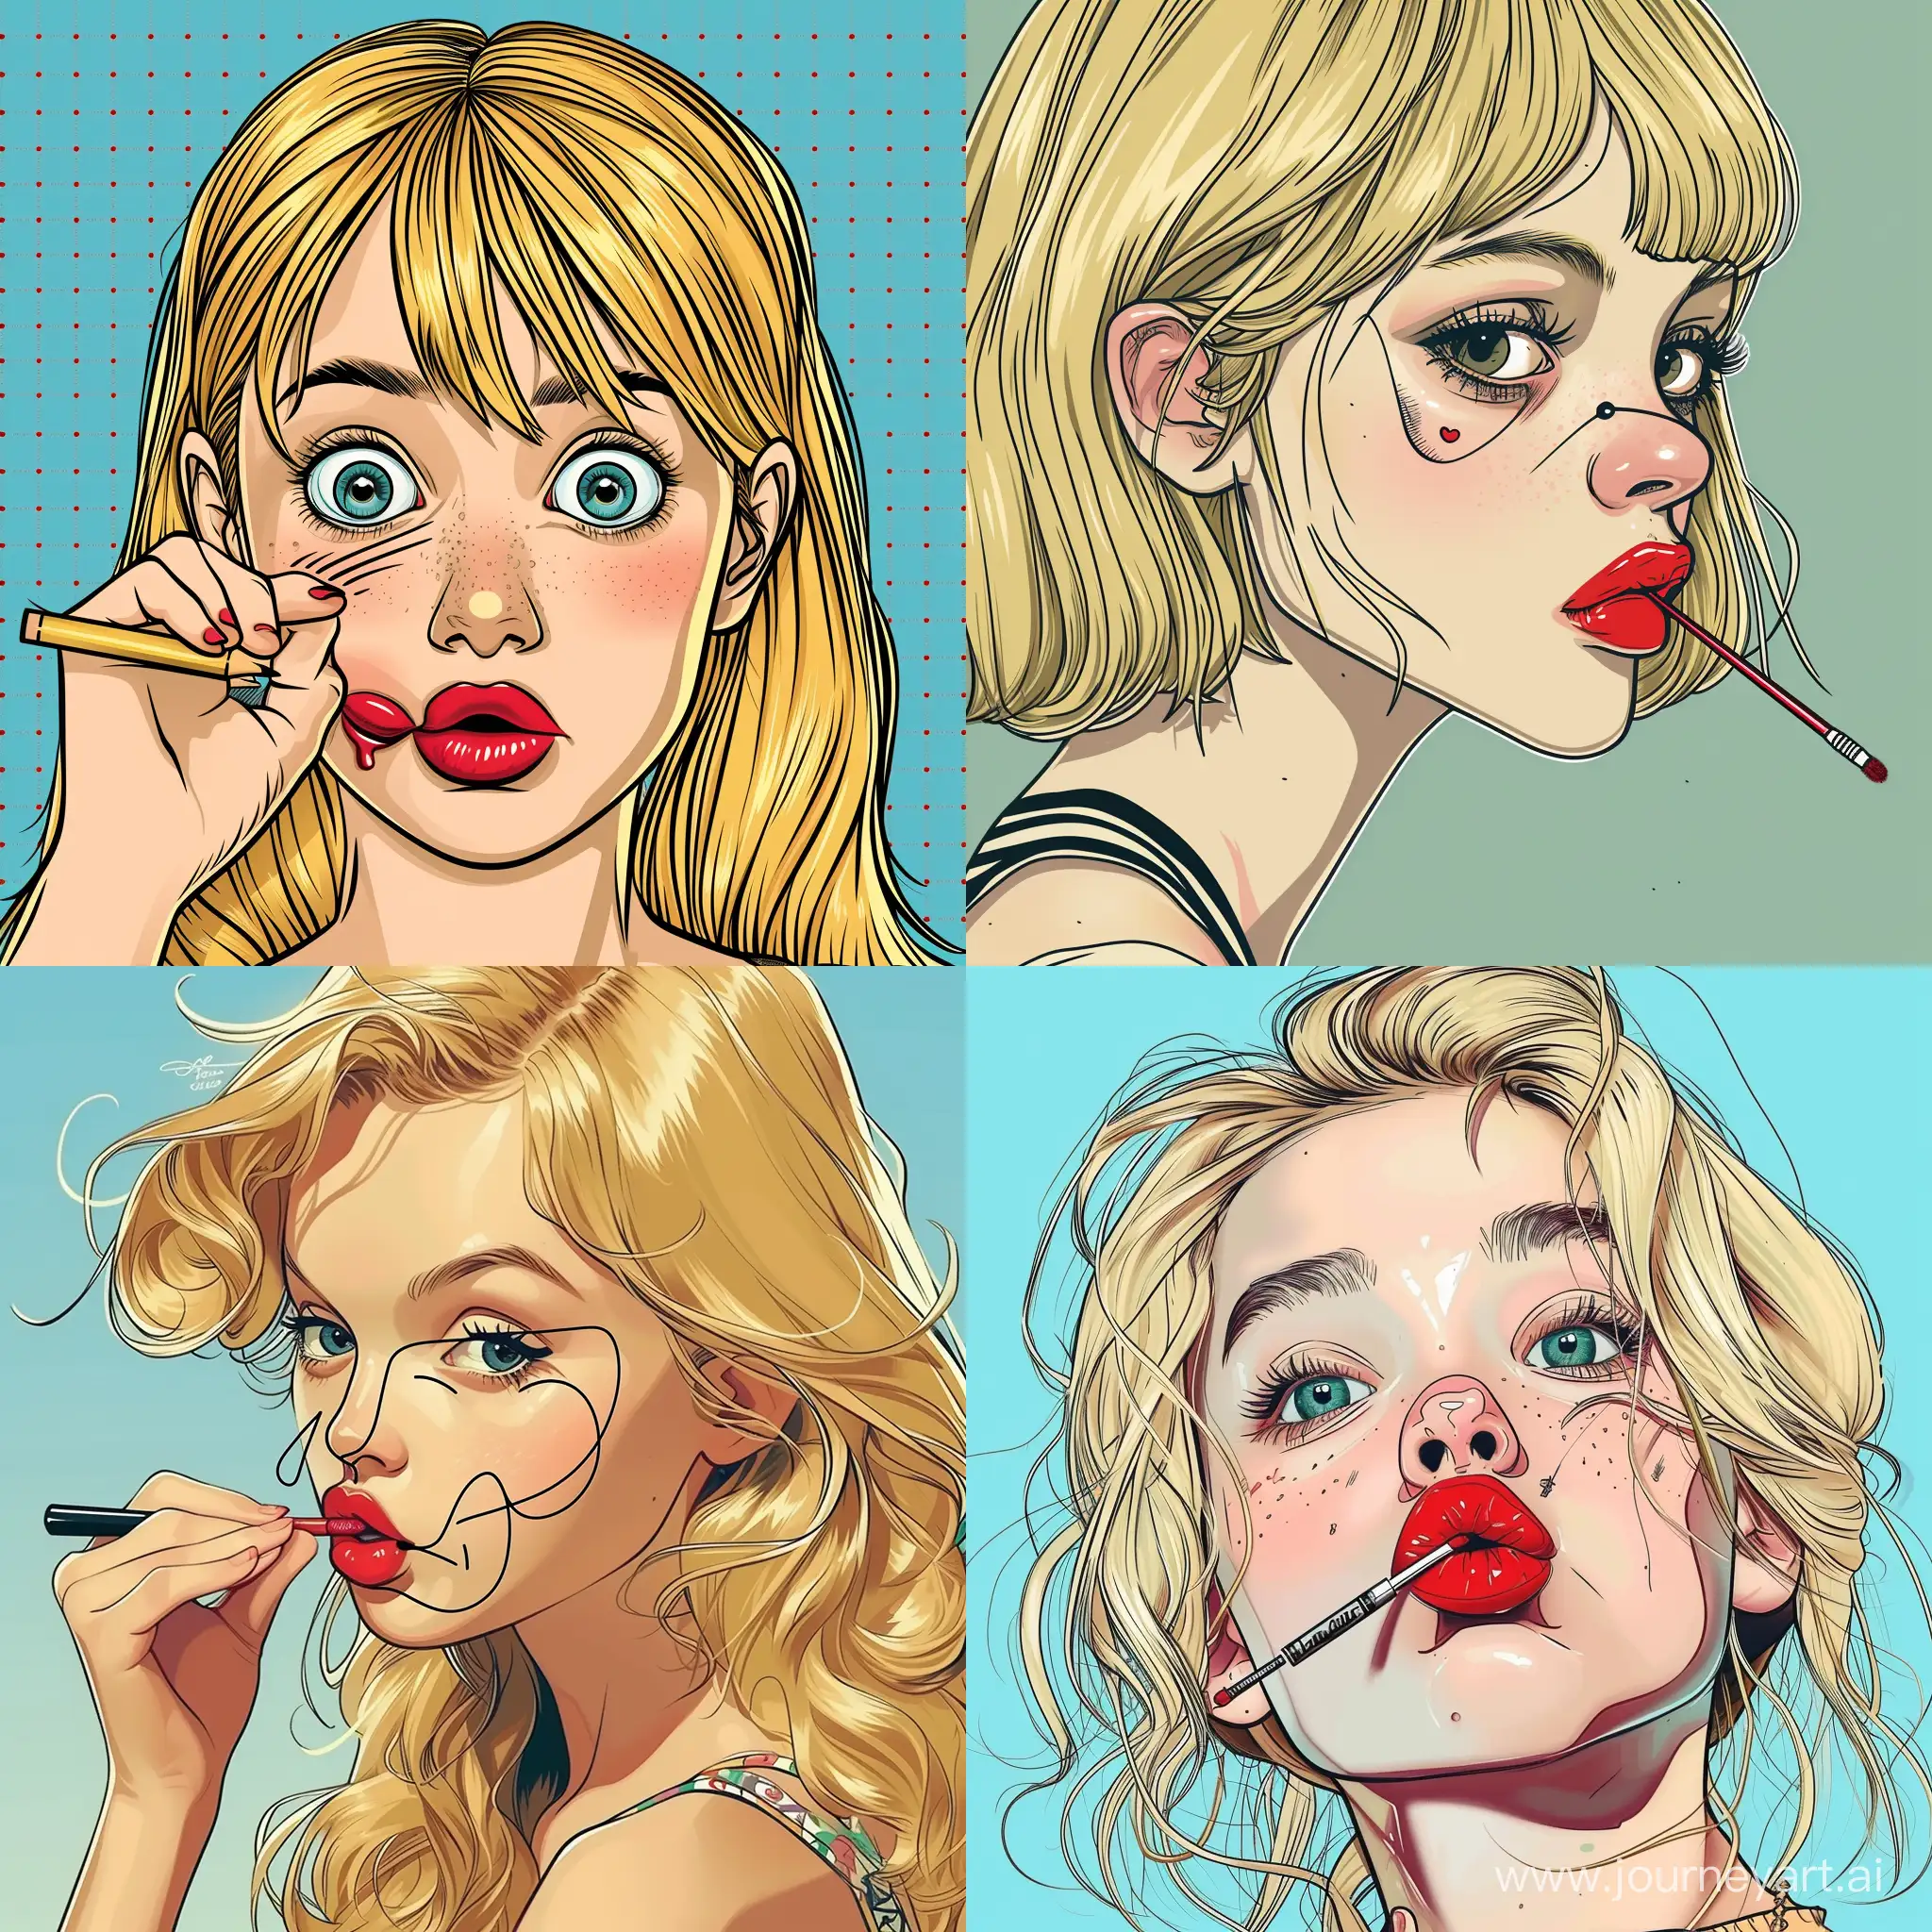 A blonde girls 15 years old with lipstick drawing her face with. With lipstick she draws her nose and her eyes. Comic. Cartoon